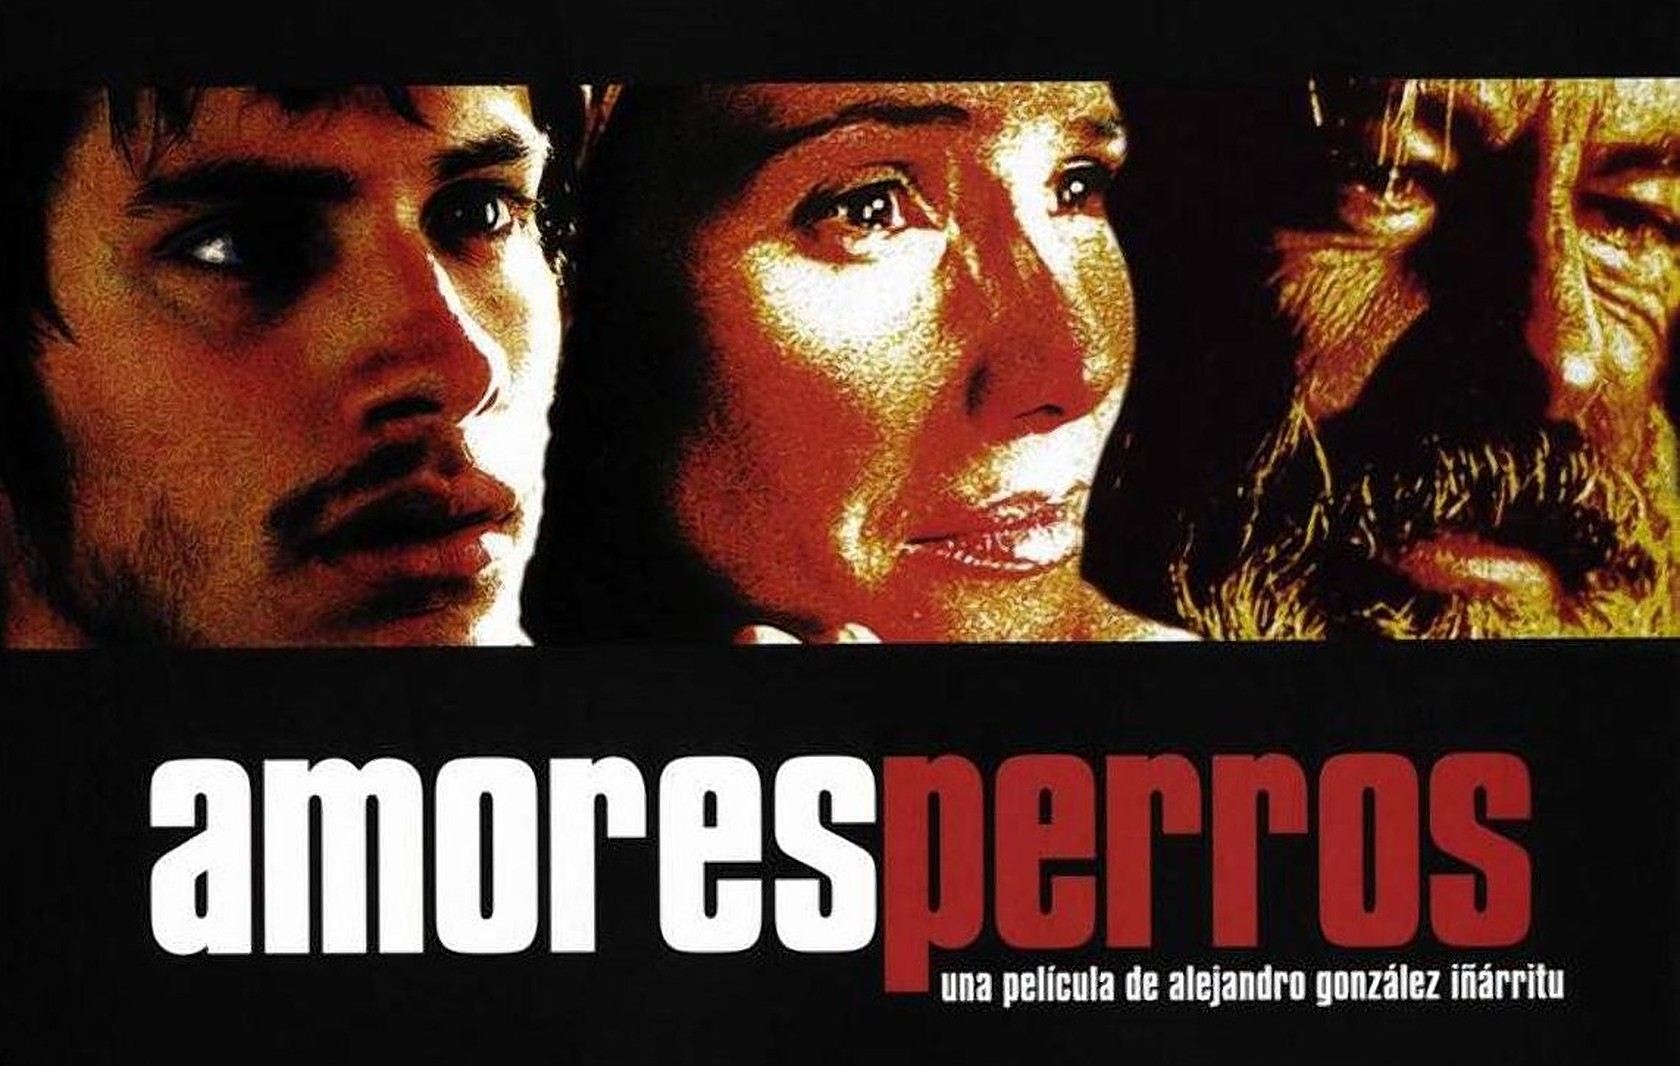 41-facts-about-the-movie-amores-perros